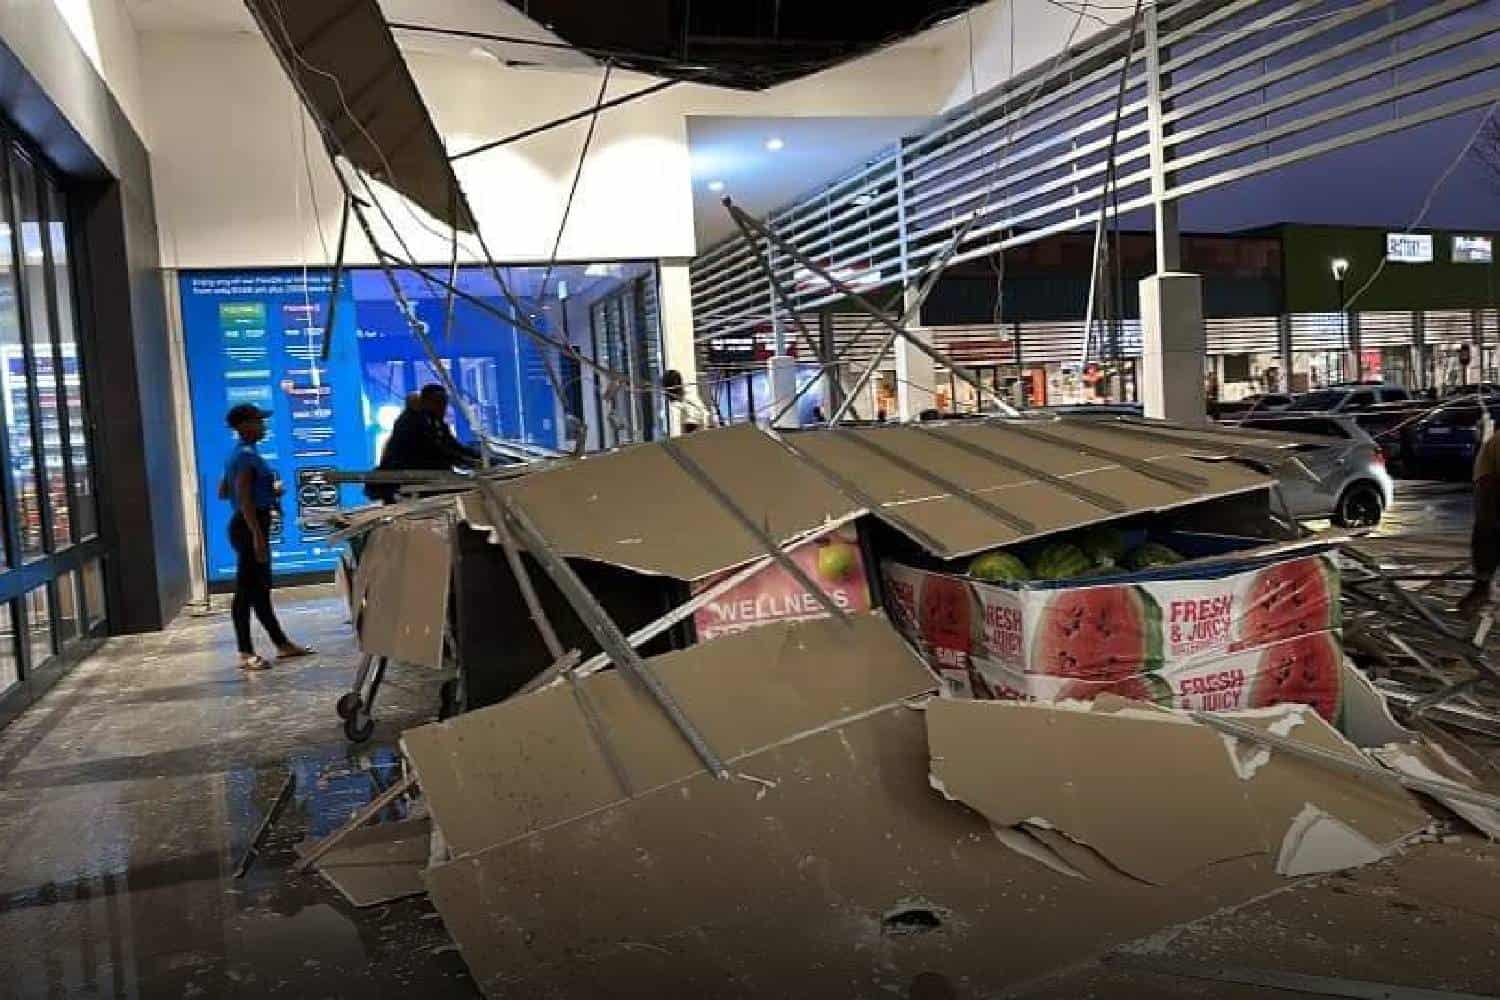 mall@55 centurion roof collapses